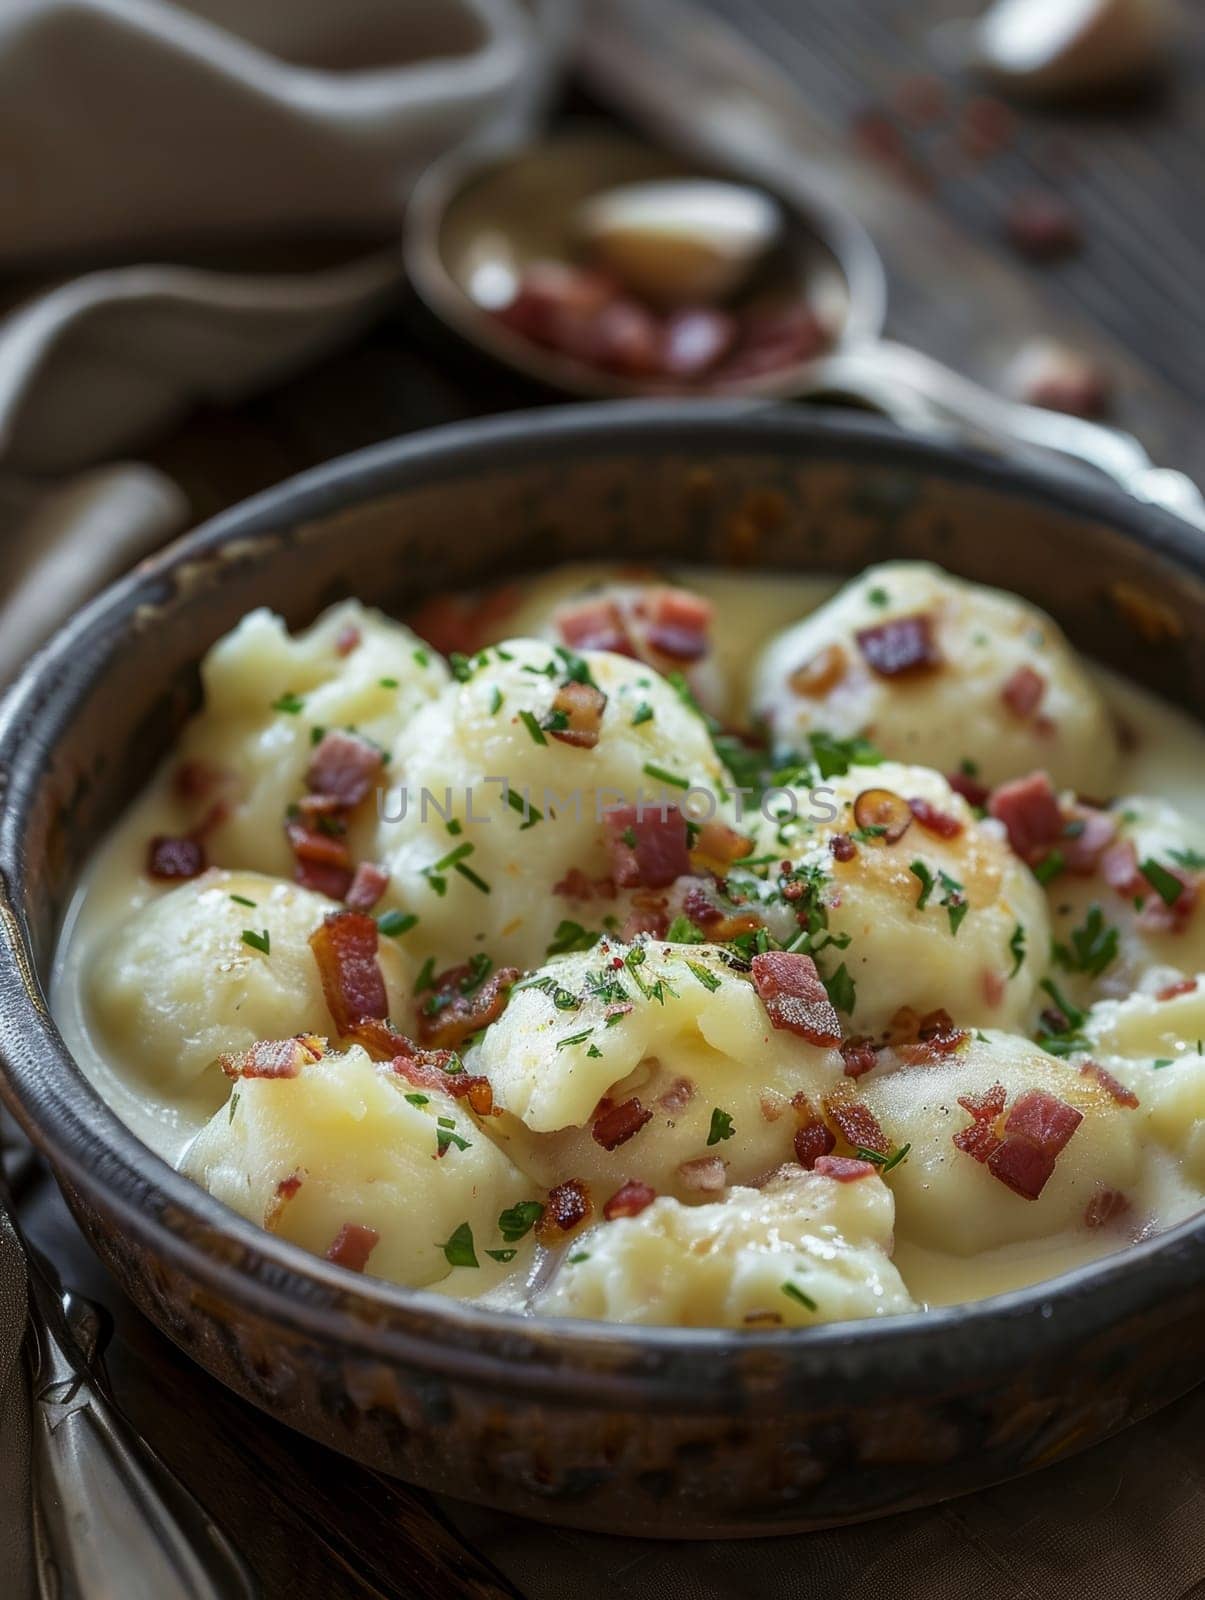 Traditional Slovakian bryndzove halusky featuring potato dumplings smothered in rich sheep's cheese and crispy bacon. This beloved comfort food dish showcases the comforting and authentic flavors. by sfinks